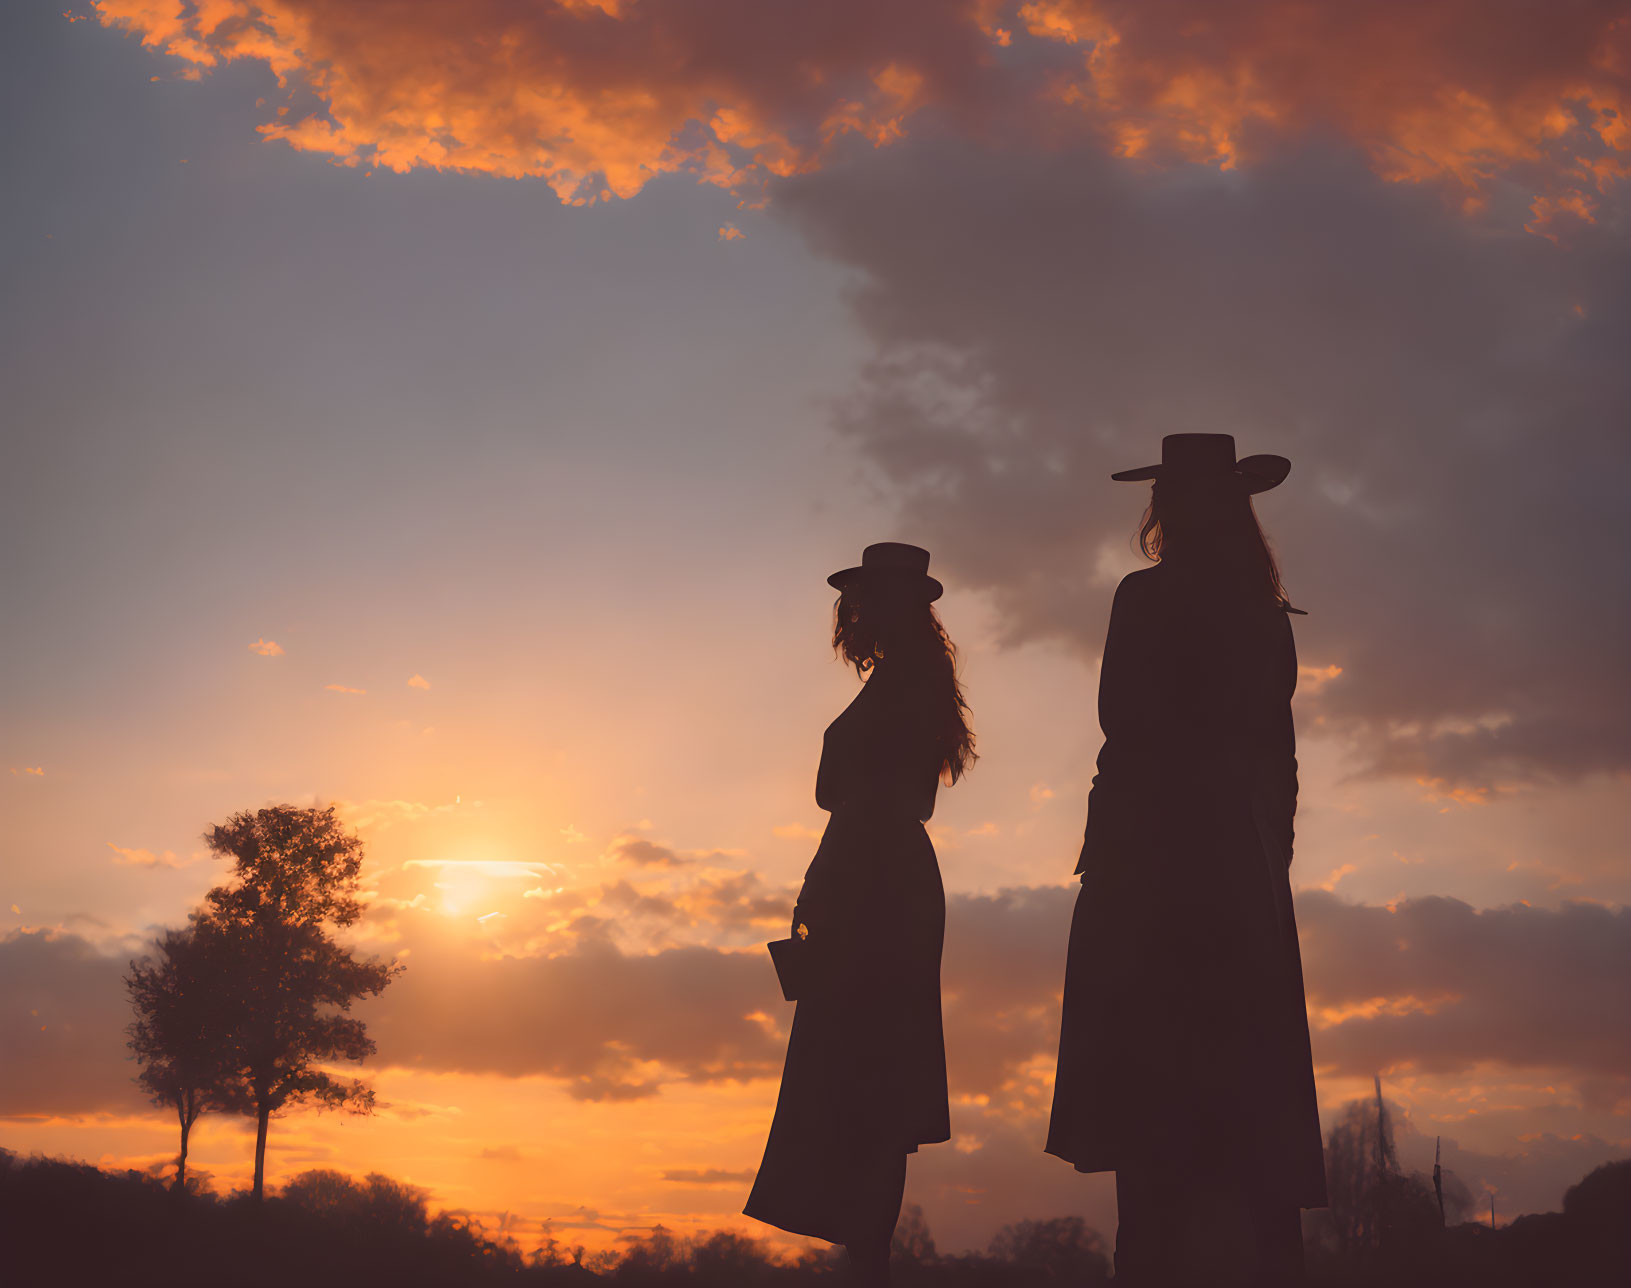 Silhouetted figures in wide-brimmed hats against vibrant sunset sky